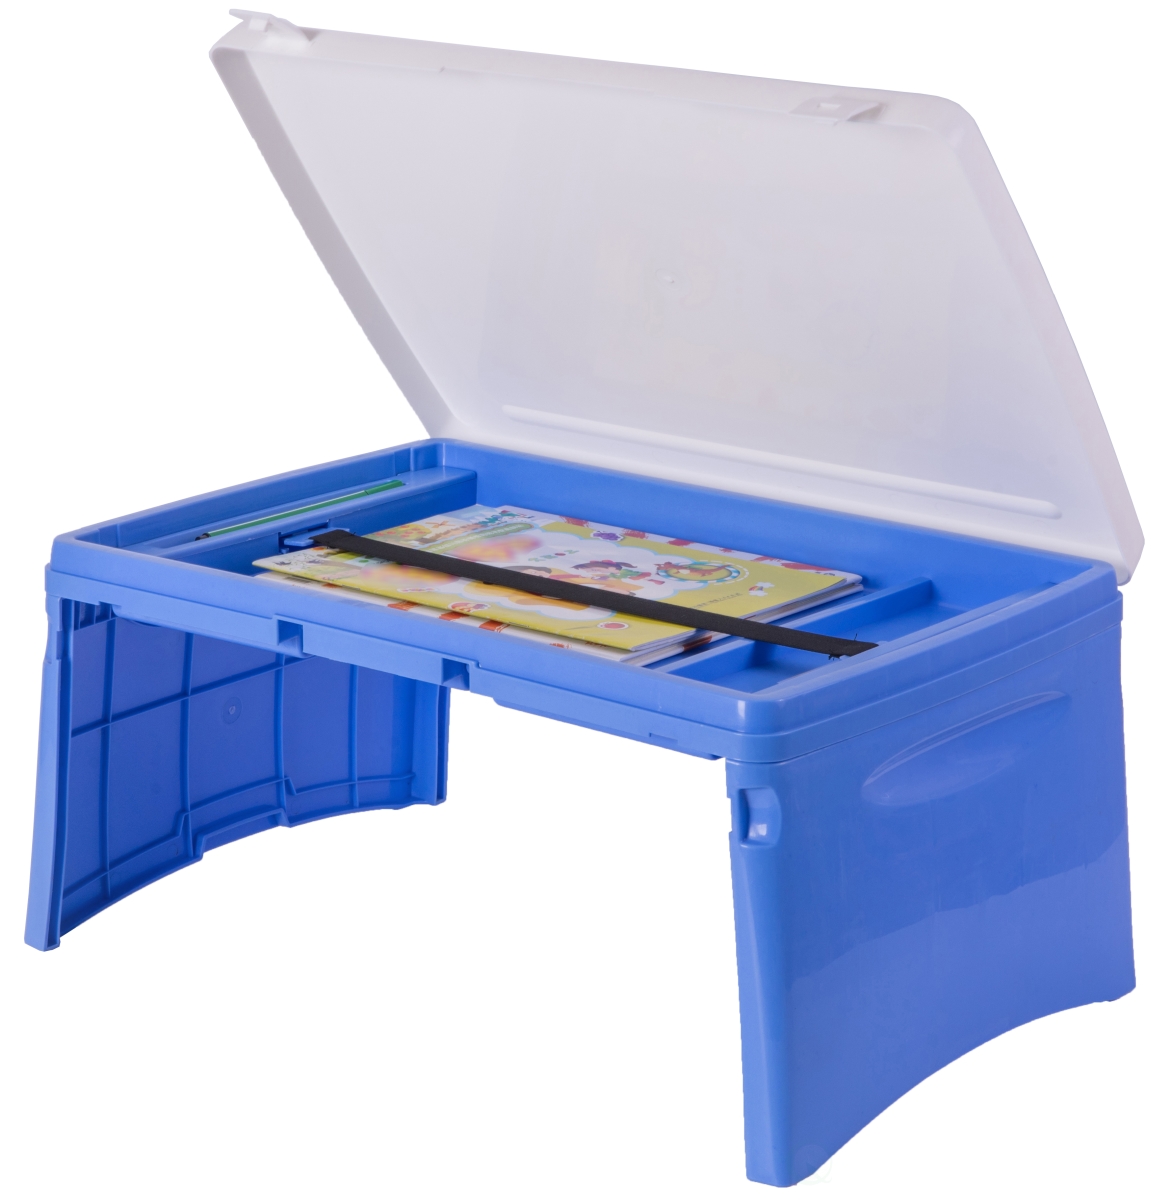 Picture of Basicwise QI003430.B 9.5 x 20.5 x 13 in. Kids Portable Foldable Plastic Lap Tray&#44; Blue & White